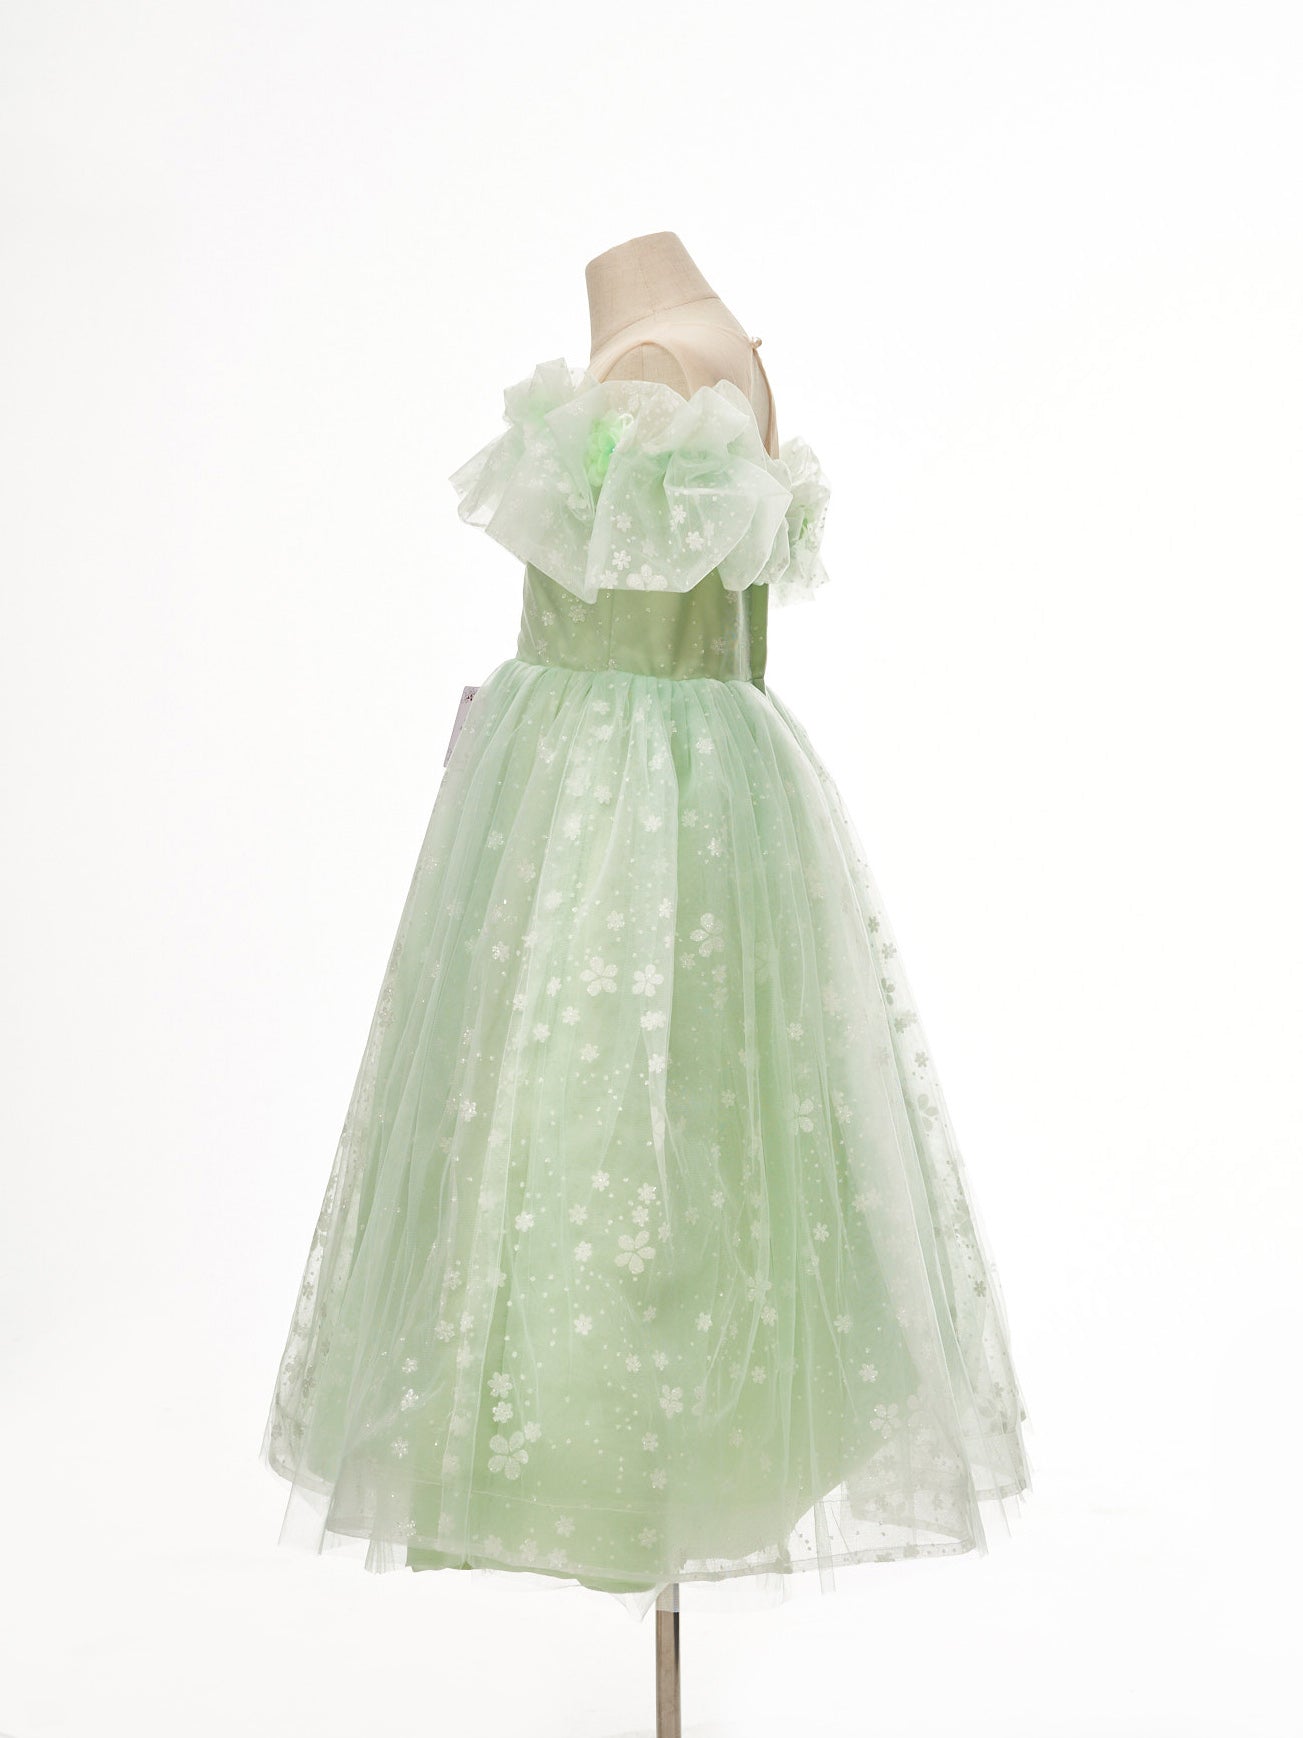 Kate Light Green Tulle Princess Kids Dress for Photography